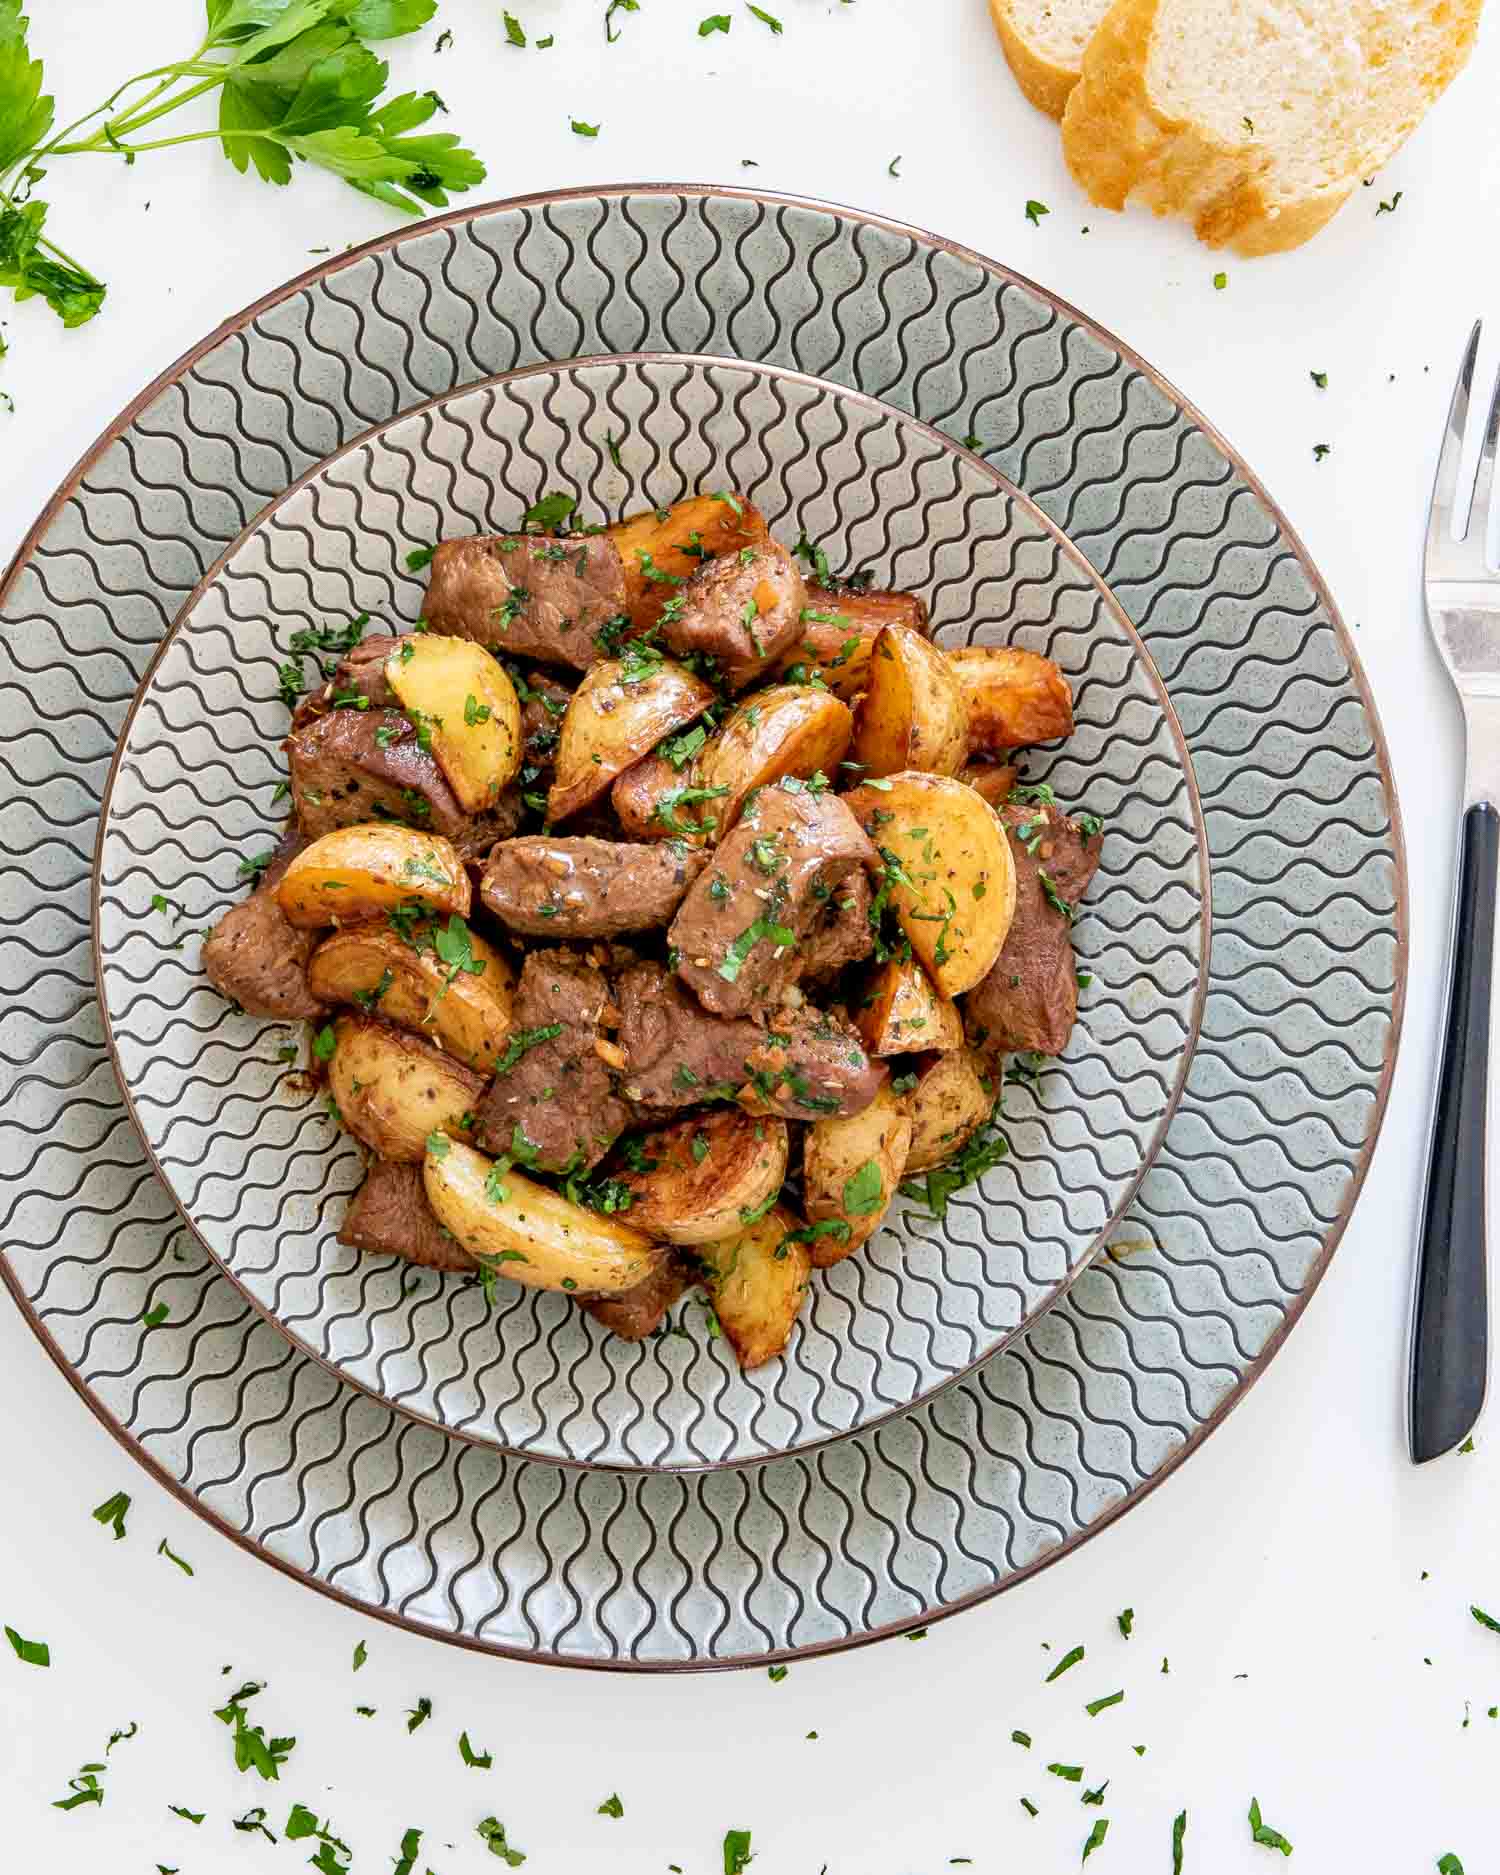 garlic butter steak and potatoes serving on a plate garnished with parsley.